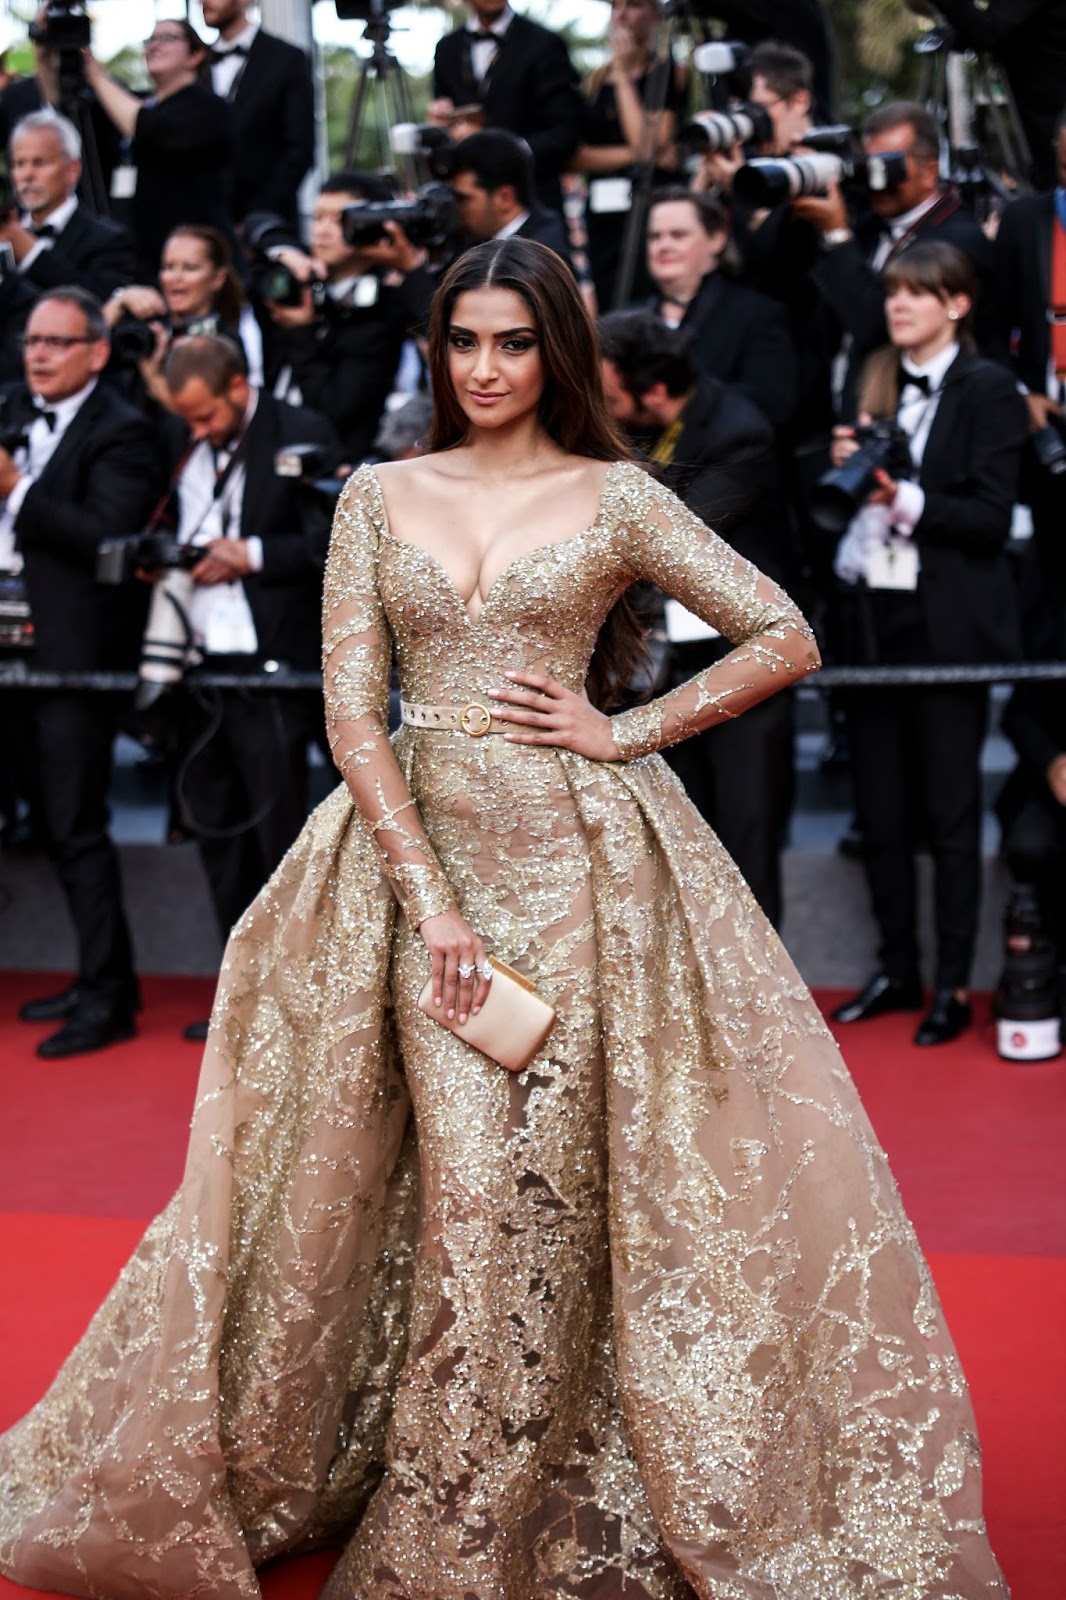 Sonam Kapoor Sexiest Cleavage Show In Elie Saab Couture At â€˜The Killing Of A Sacred Deerâ€™ Premiere During 70th Cannes Film Festival 2017